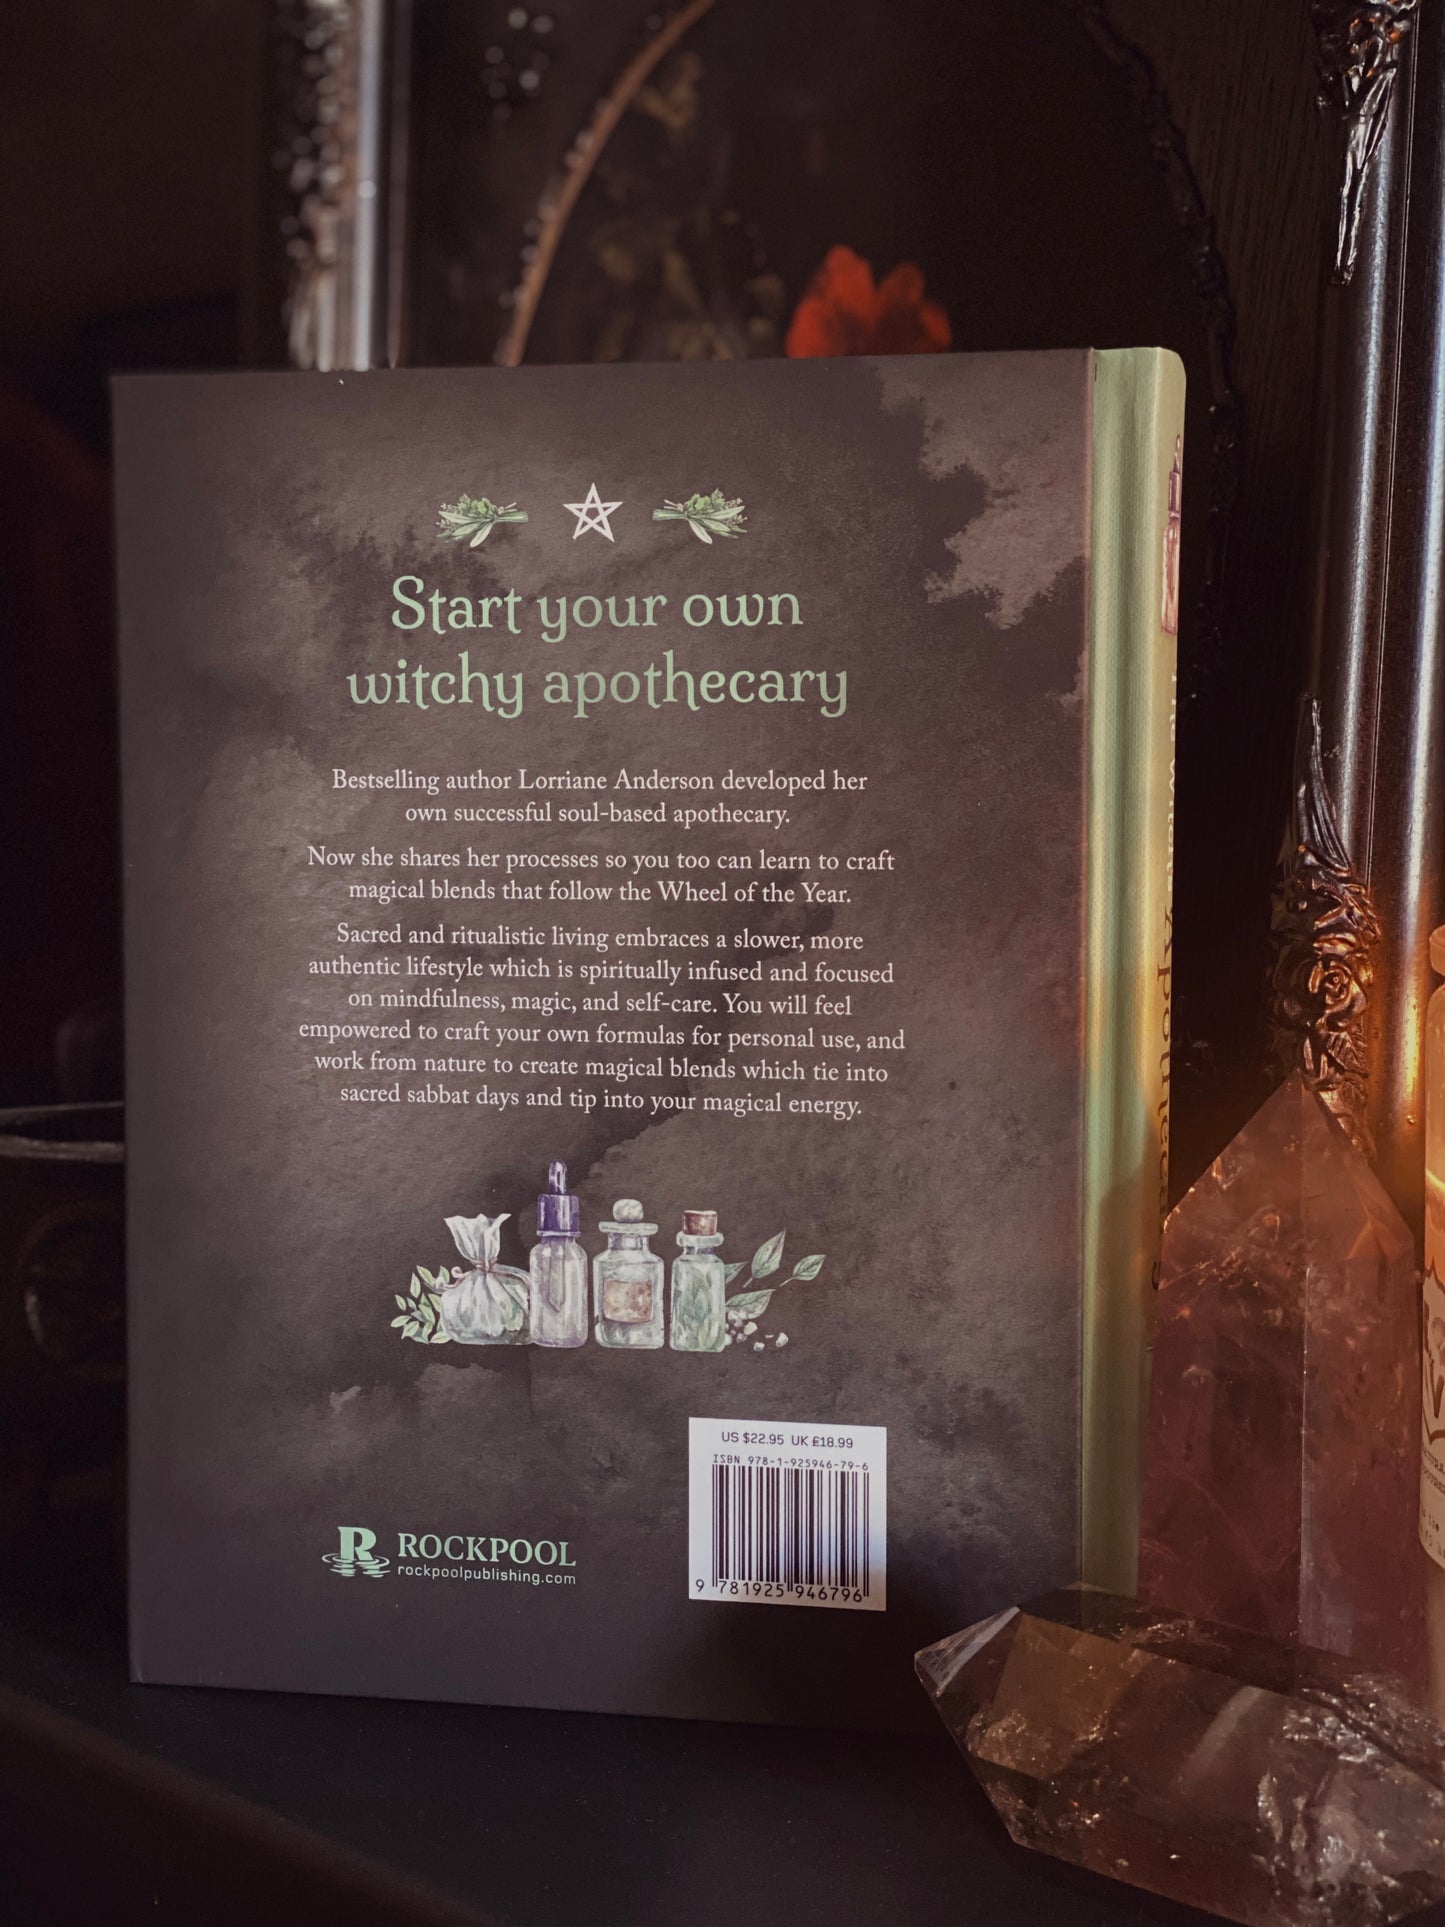 The Witch’s Apothecary: Seasons of the witch